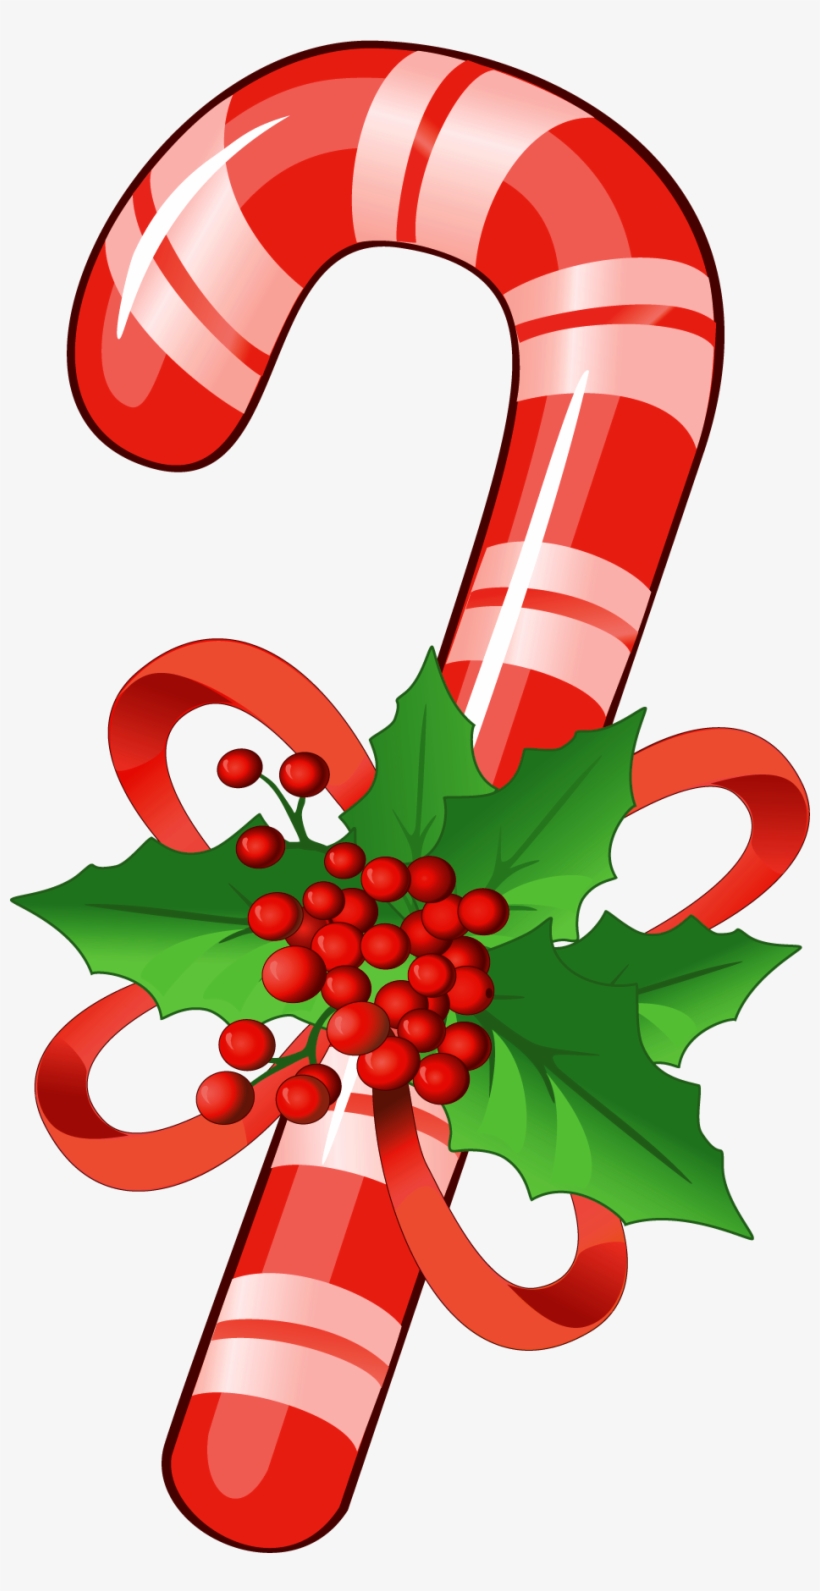 Peppermint Candy Cane Cartoon / If you can't get enough of candy canes